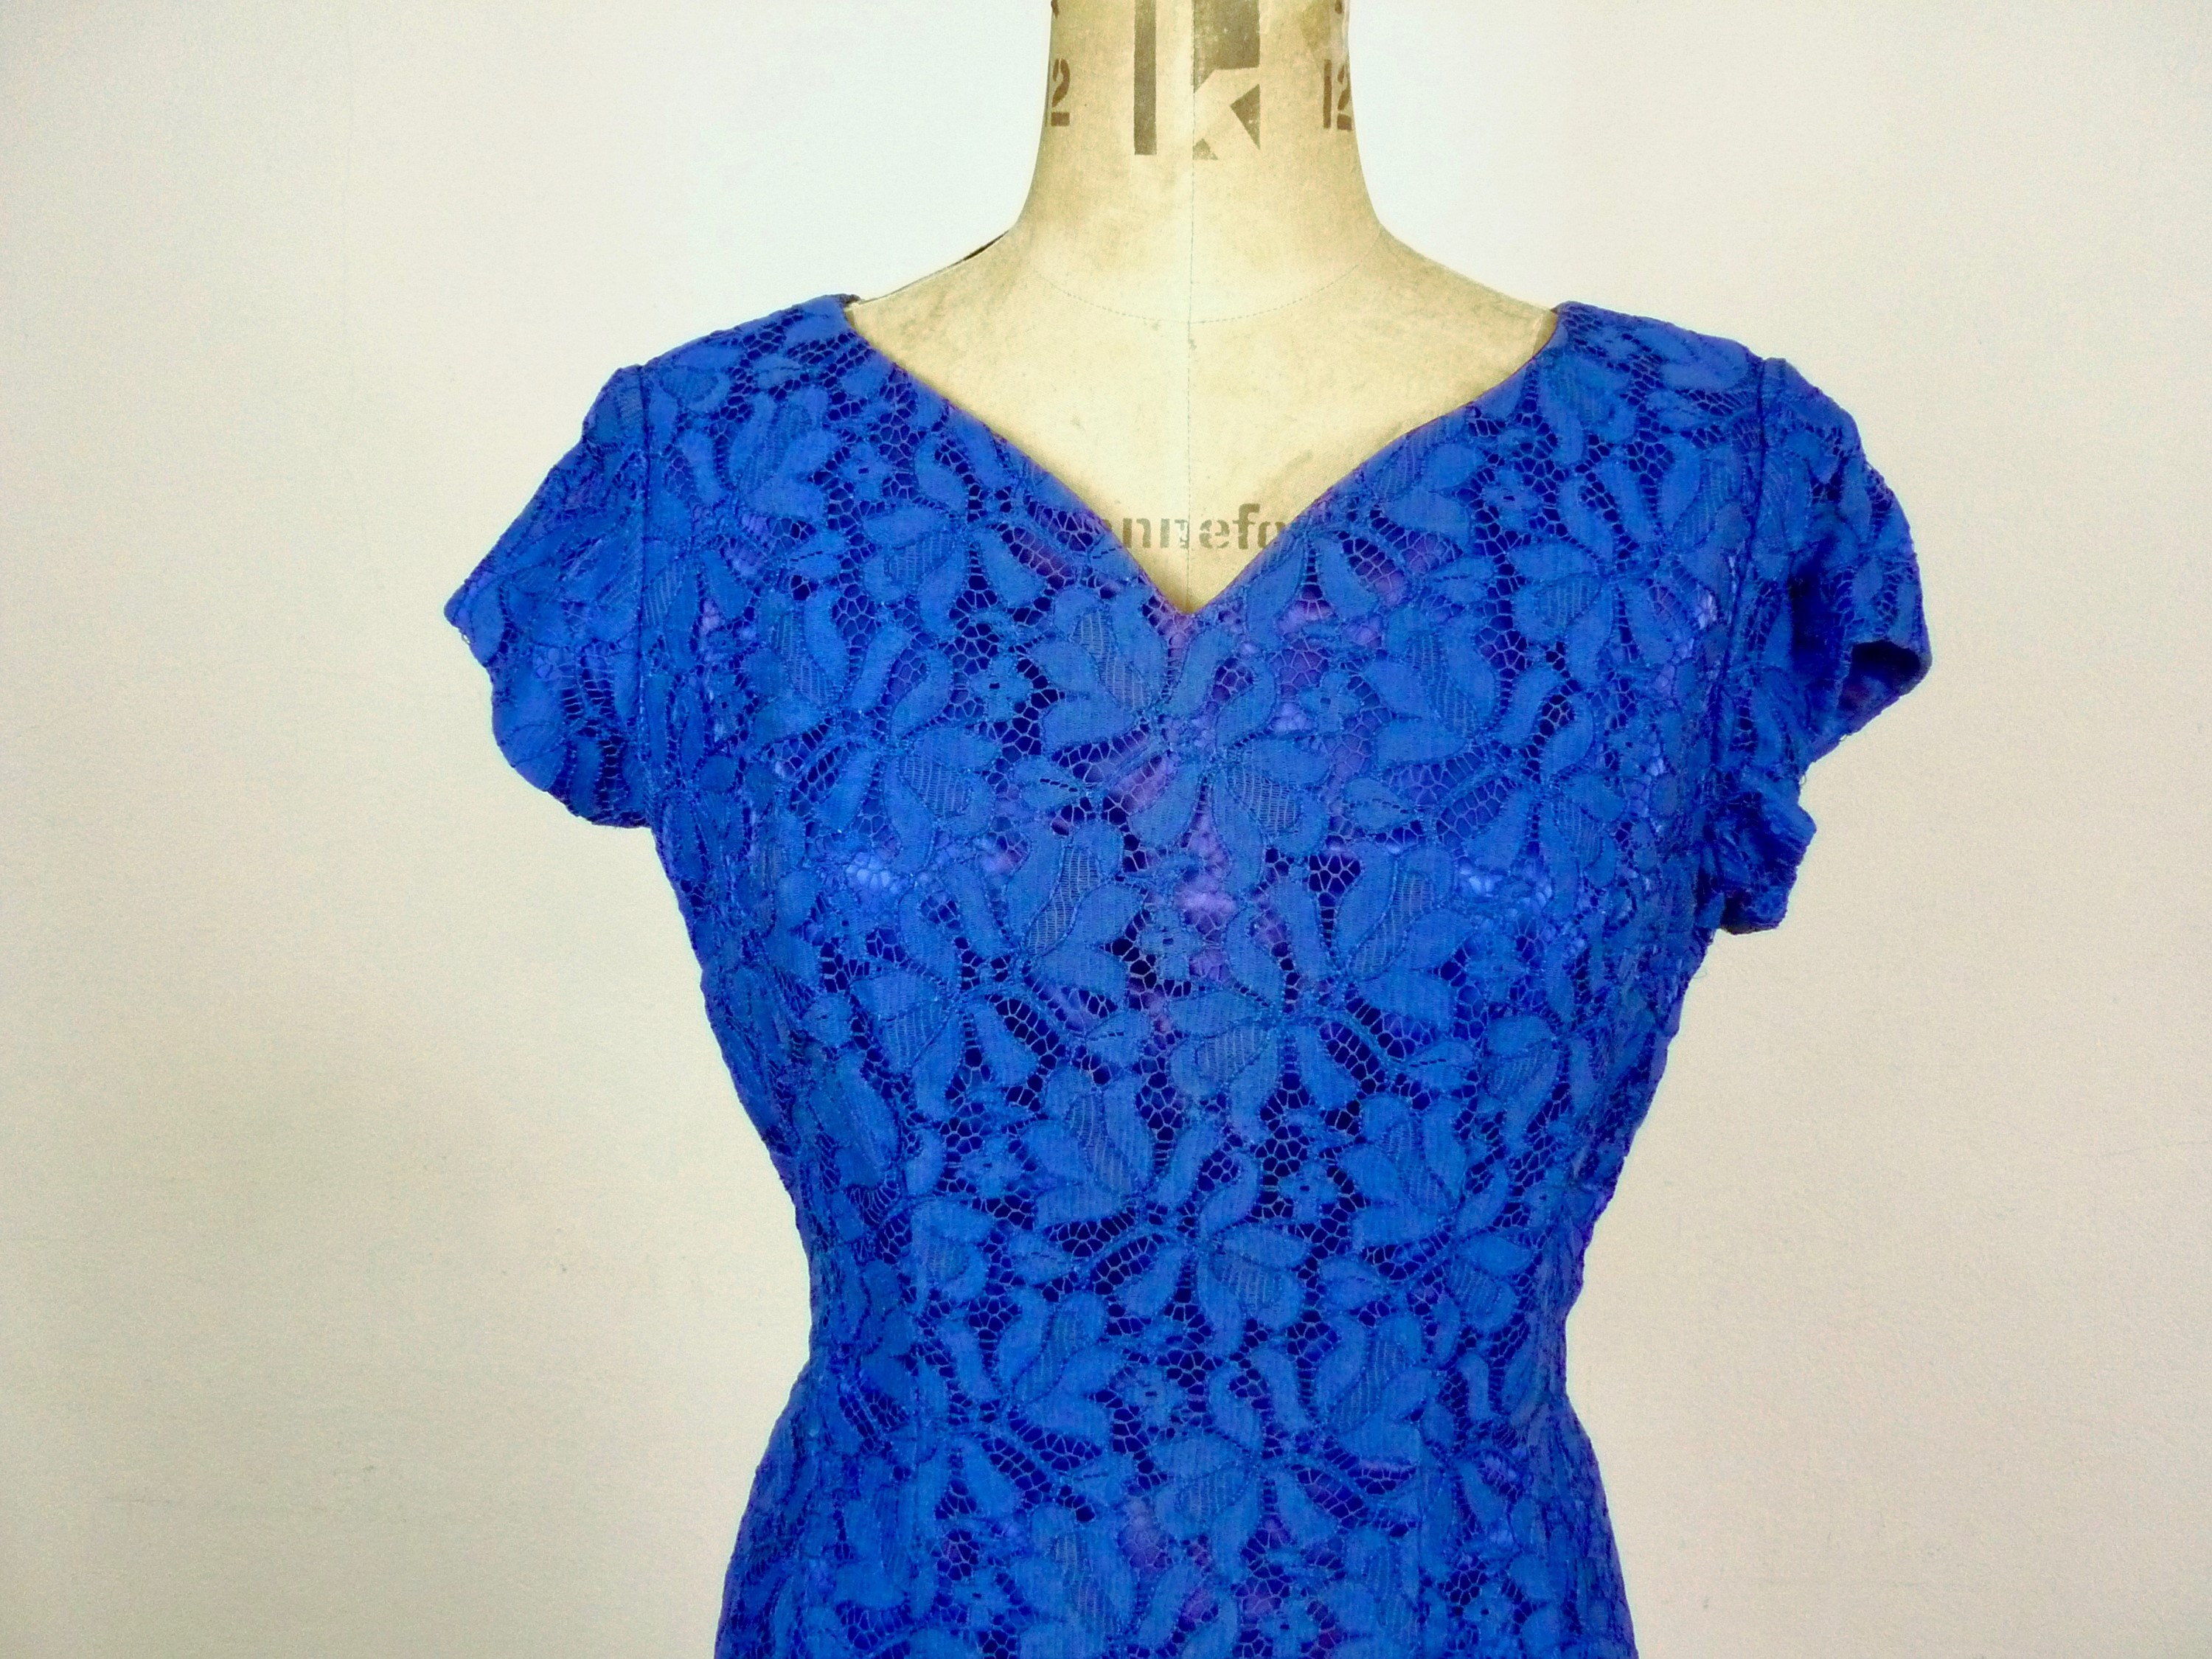 An early 1960s W. Lyons (Gowns) Ltd 'Lady in Black' range indigo blue two-piece lace wiggle dress - Image 3 of 7